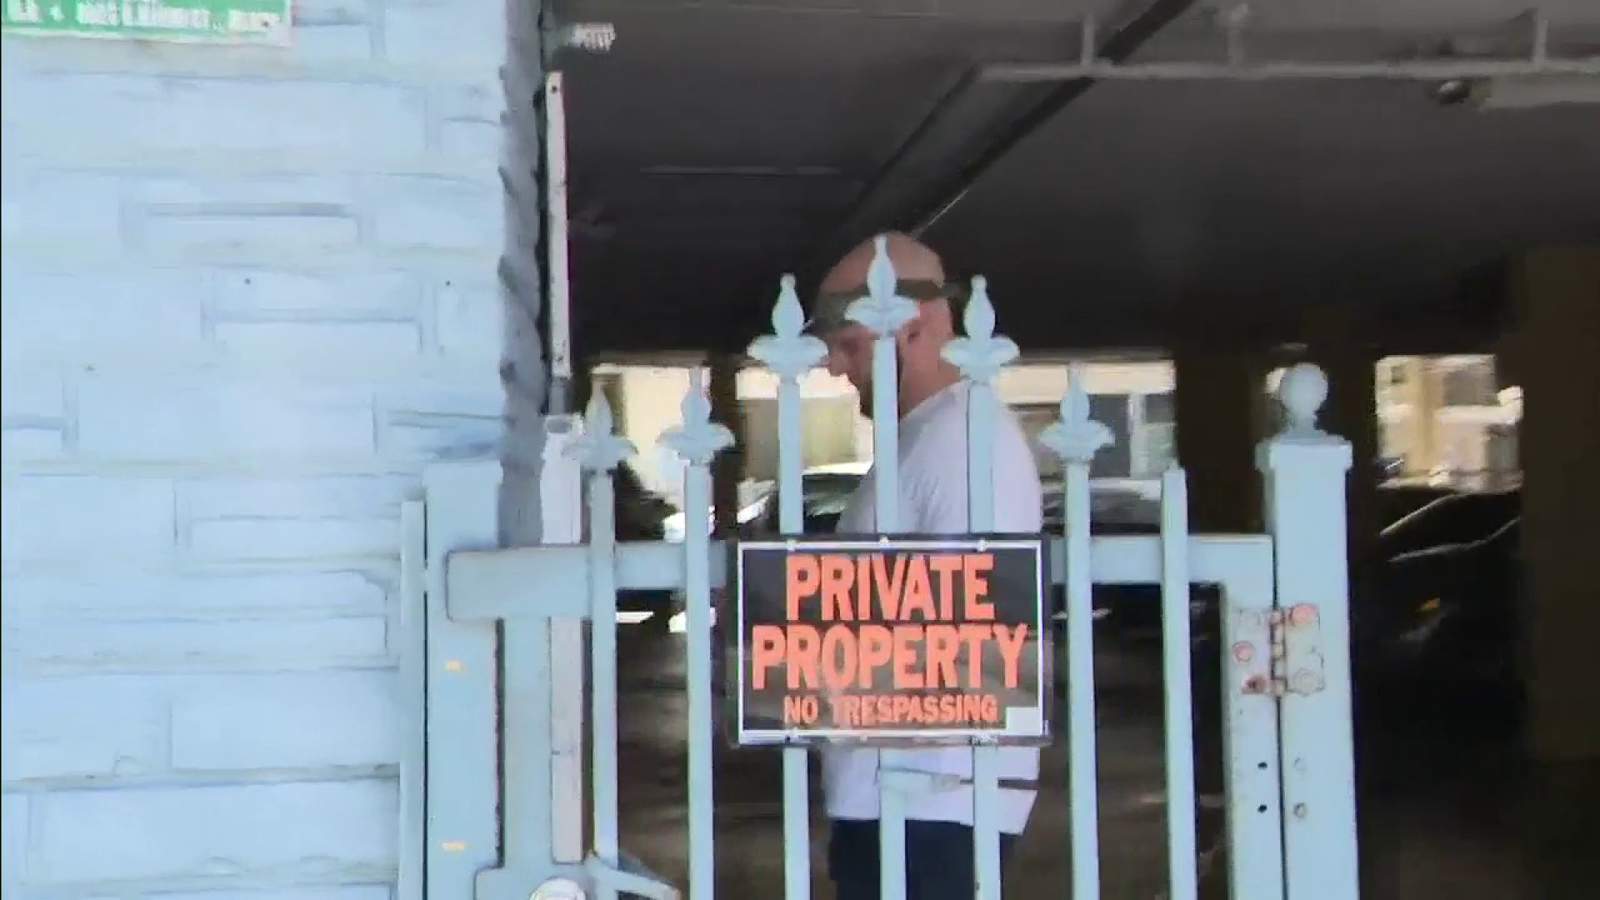 Miami Beach man hires security, locksmith to get into his own apartment to kick out squatter